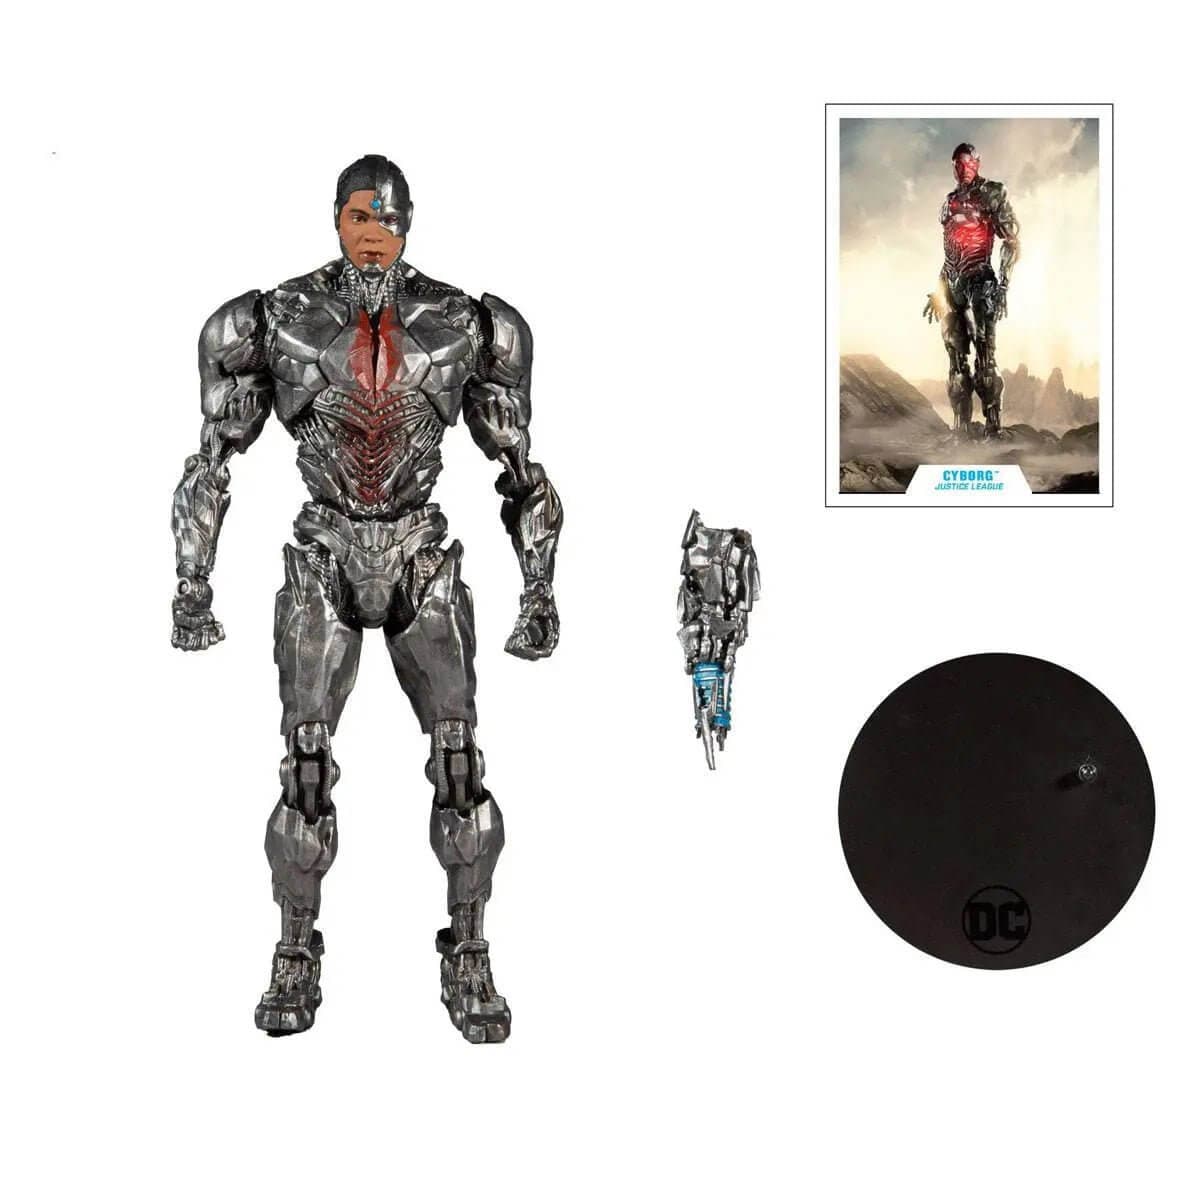 DC Zack Snyder Justice League Cyborg 7-Inch Action Figure - Simon's Collectibles